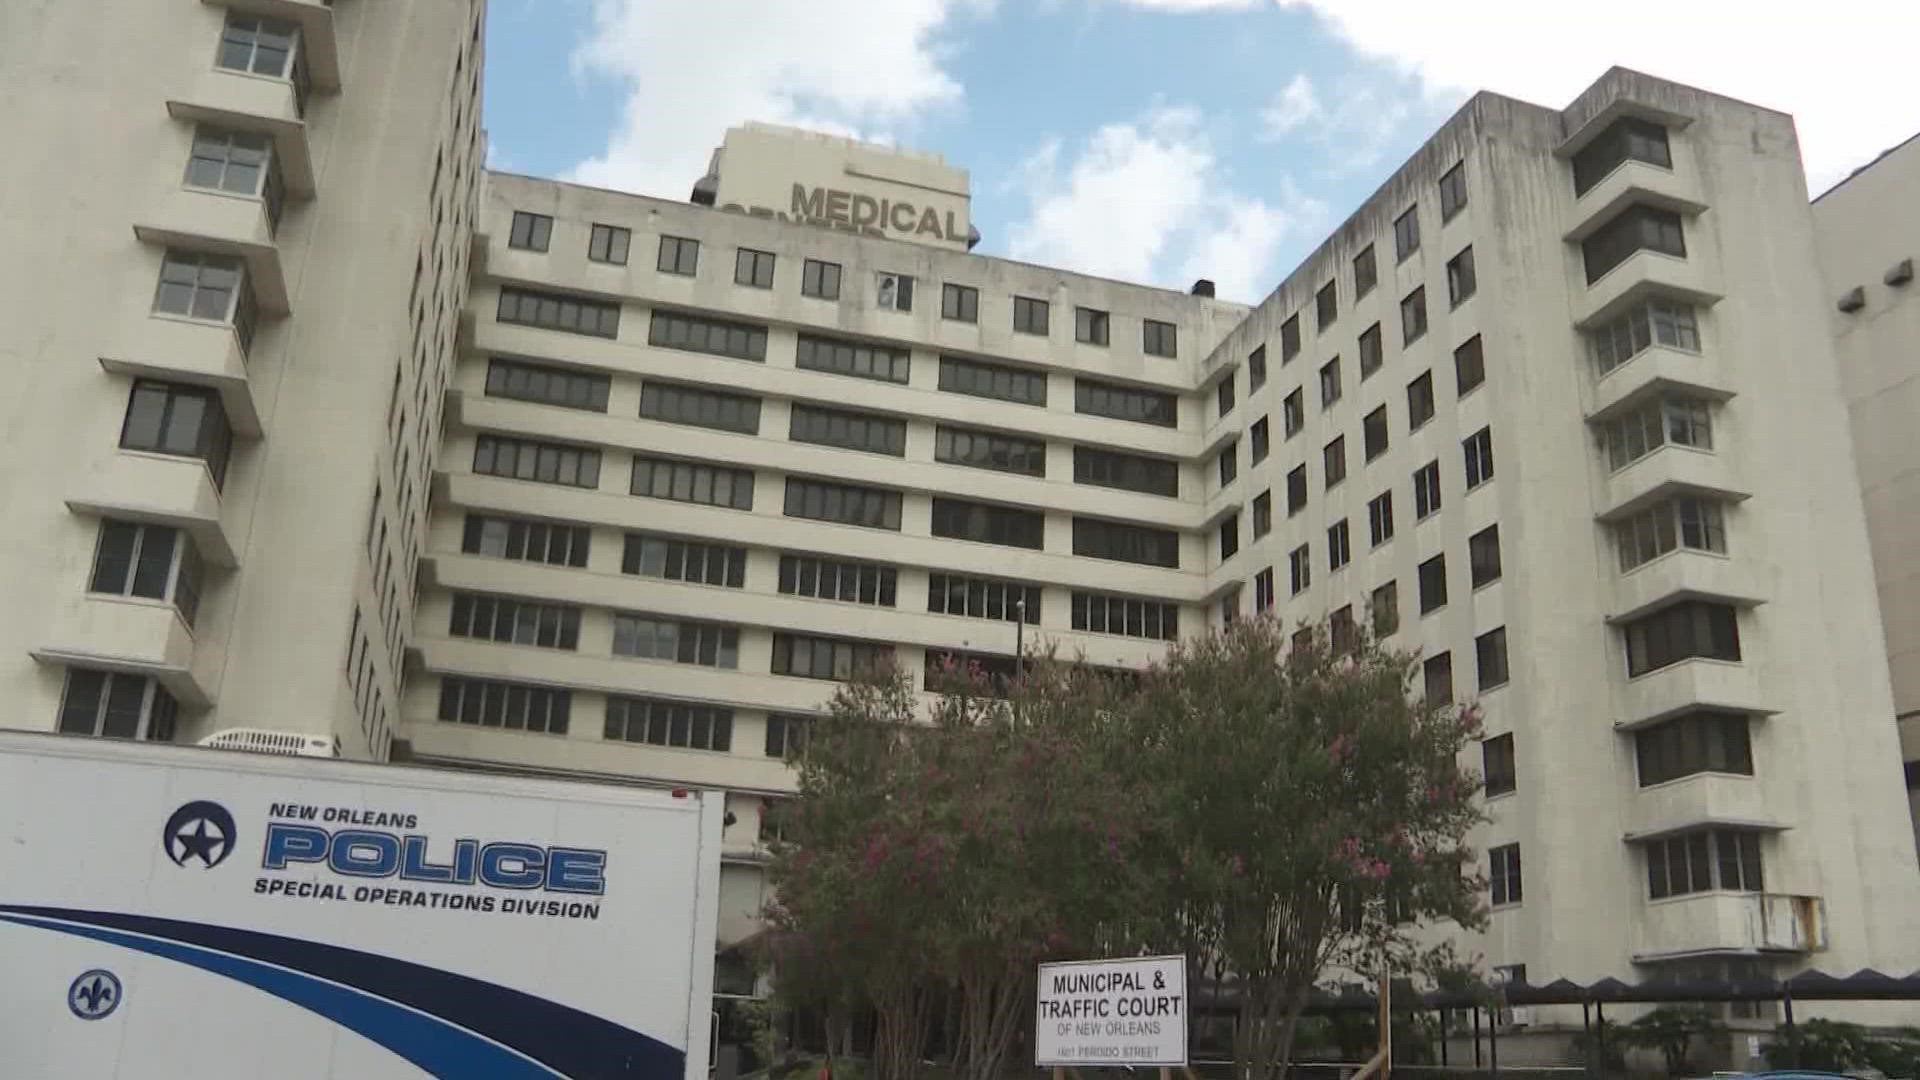 The courts have been operating out of the old VA hospital location on Perdido Street while the city courthouse is undergoing renovations.